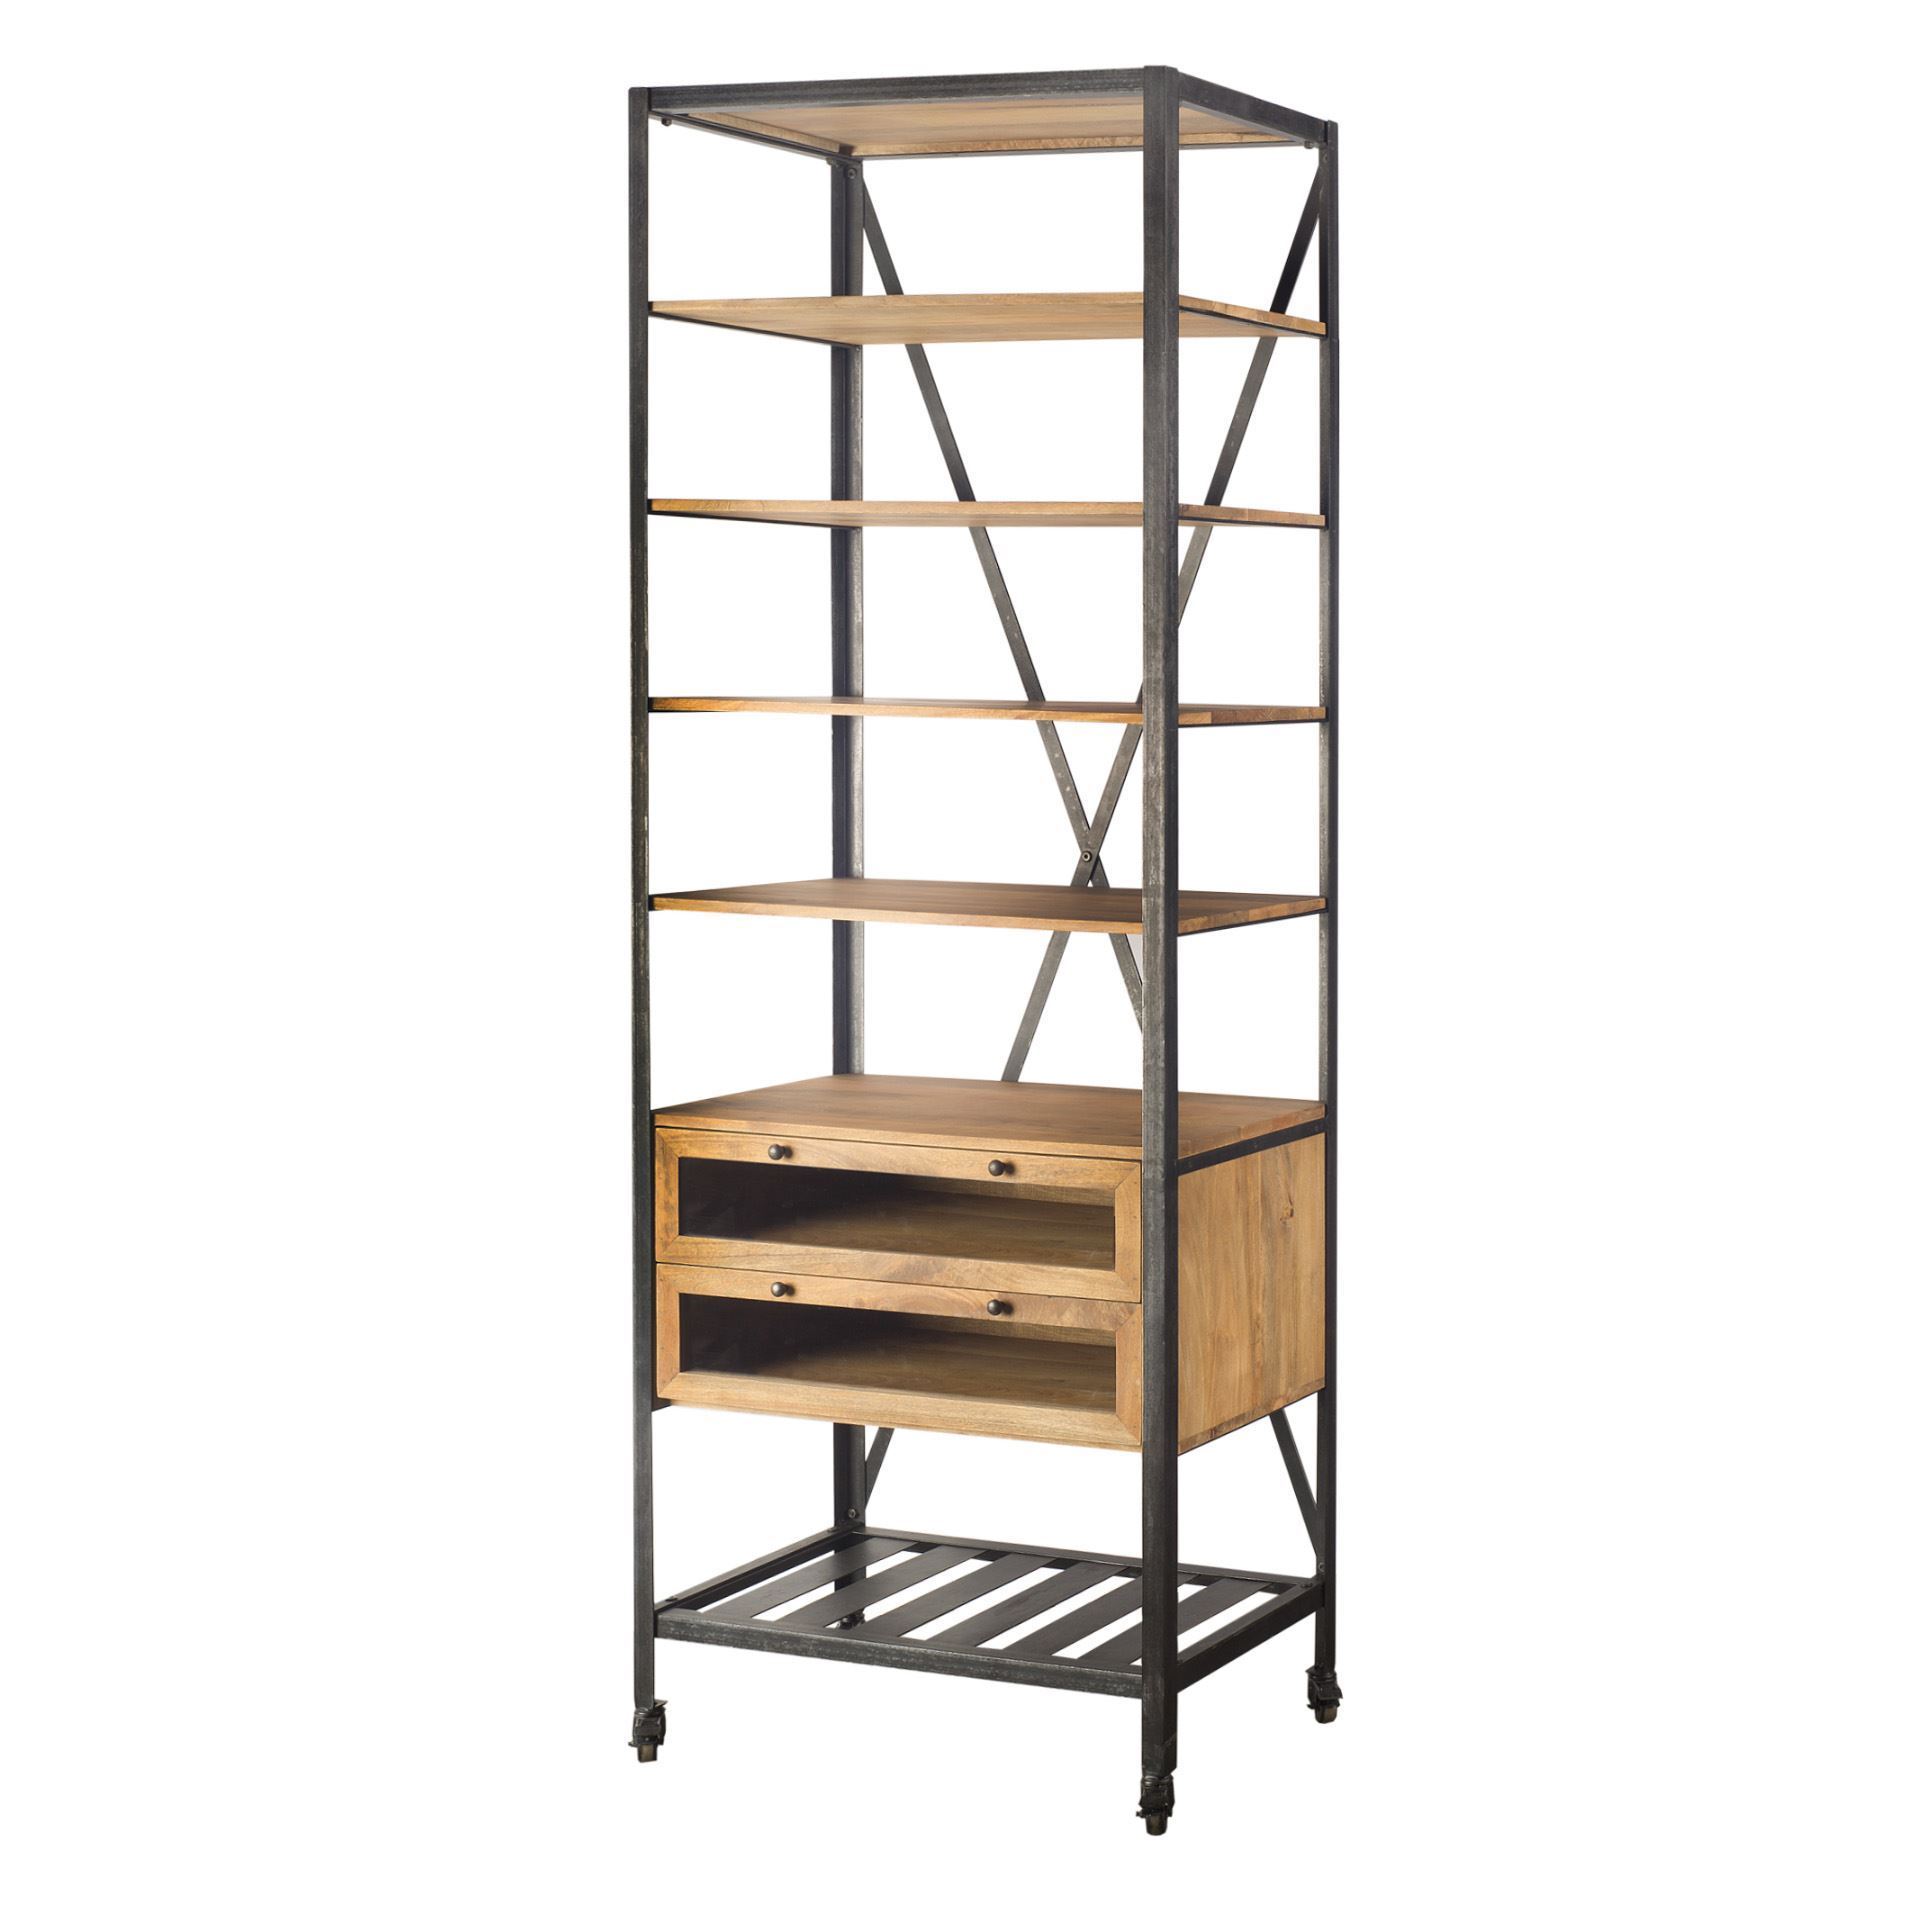 Light Brown Wood and Metal Shelving Unit with 6 Shelves